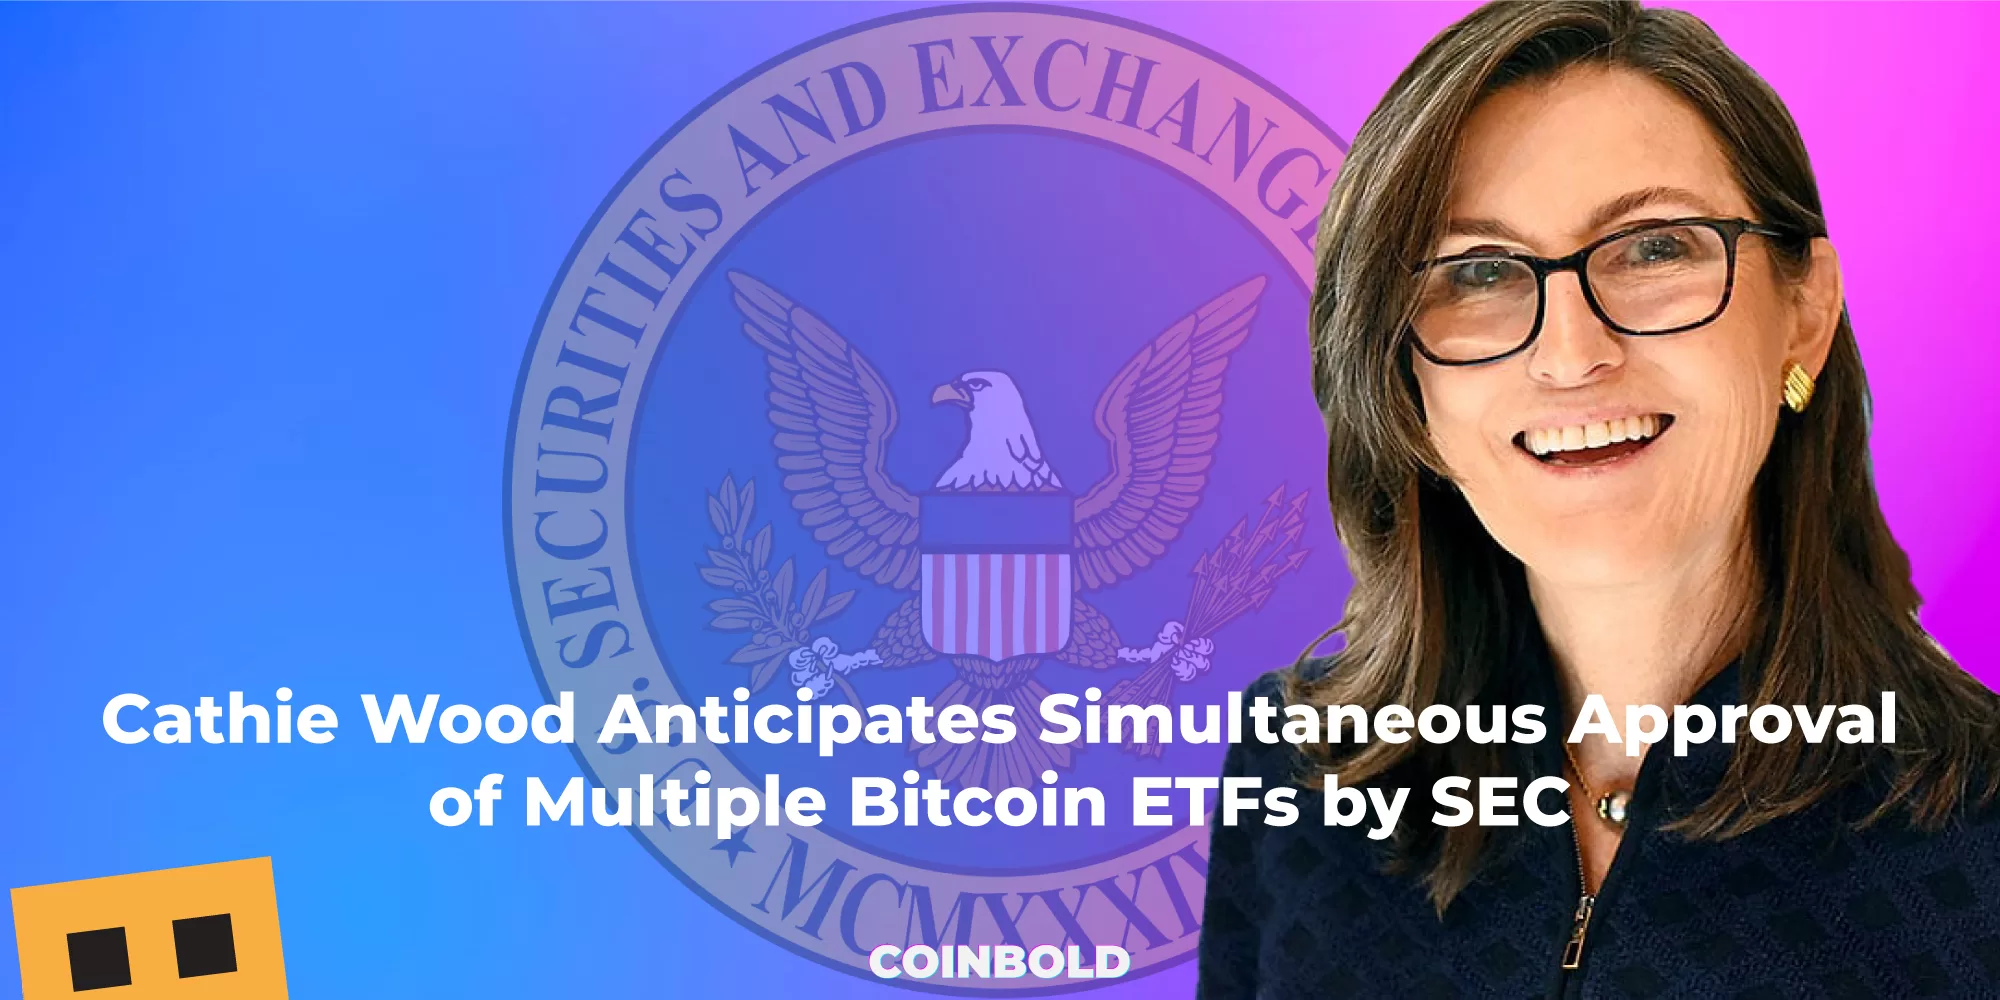 Cathie Wood Anticipates Simultaneous Approval of Multiple Bitcoin ETFs by SEC